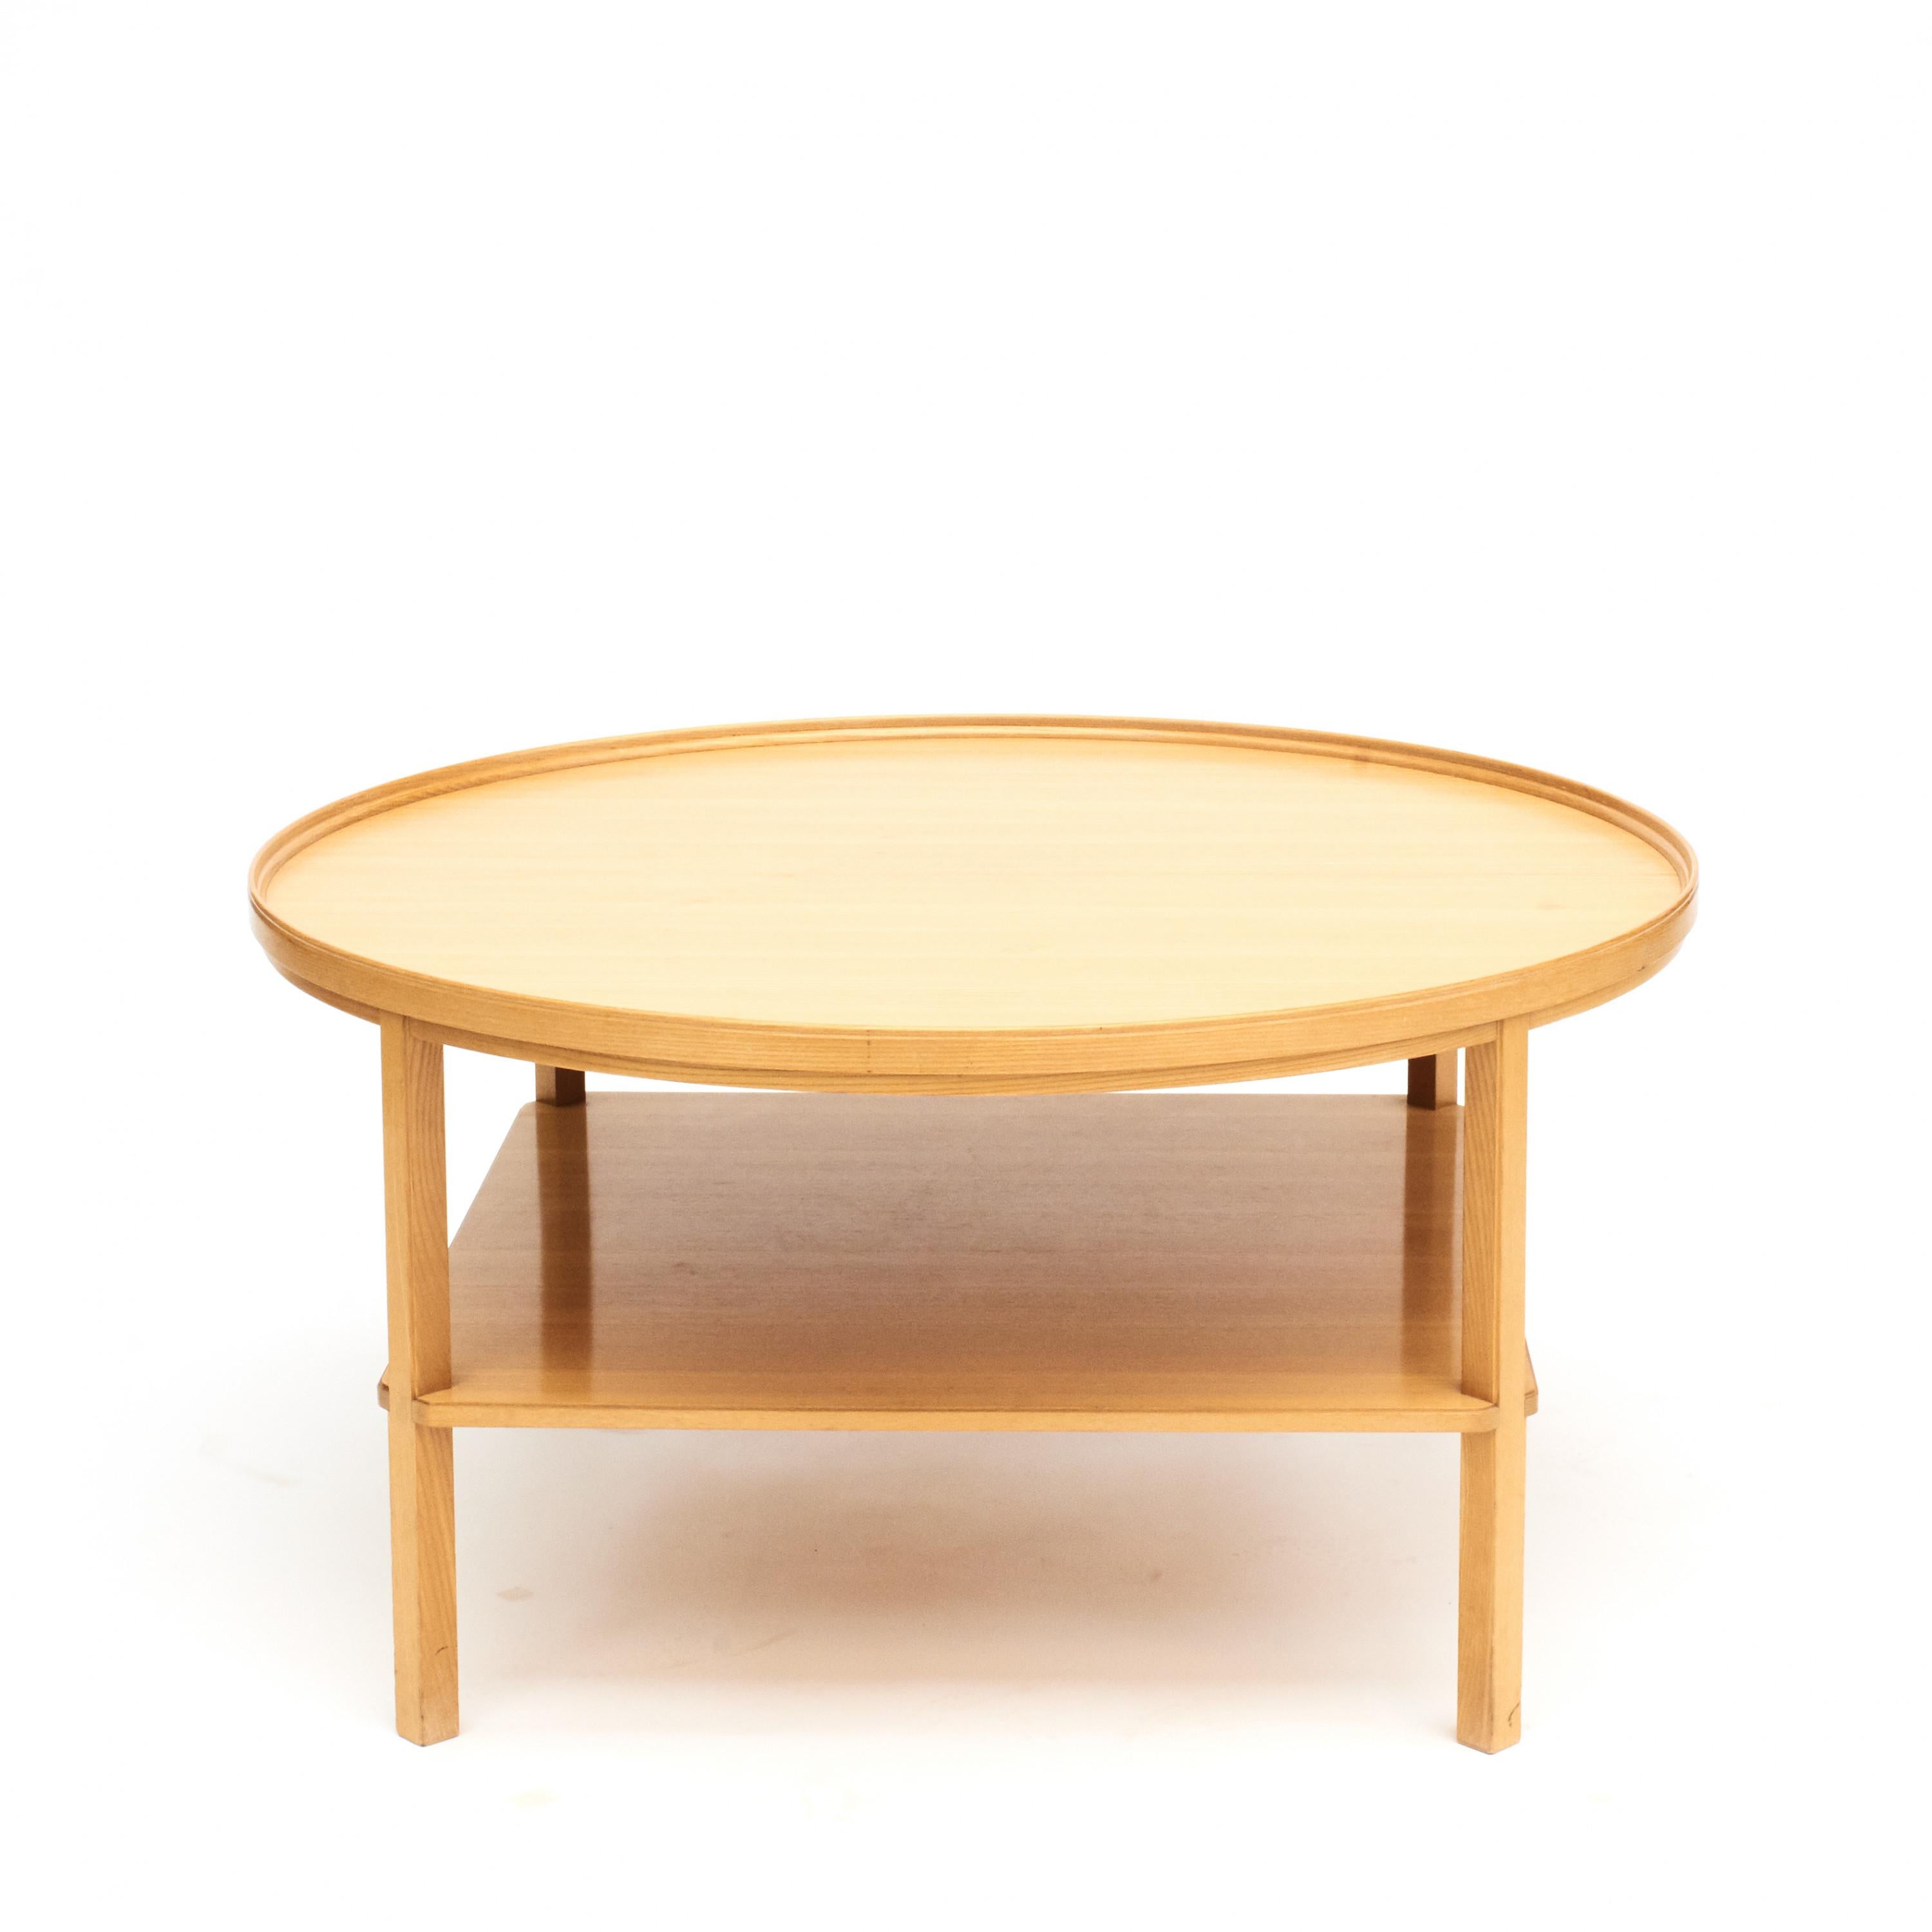 Round oak wood coffee table by Kaare Klint, model 6687.
Made in oak with lower shelf and a raised rim around the table top.
Designed in 1929 by Kaare Klint (1888-1954).
Produced by Rud. Rasmussen approx. 1950. Under tabletop manufacturer's label.